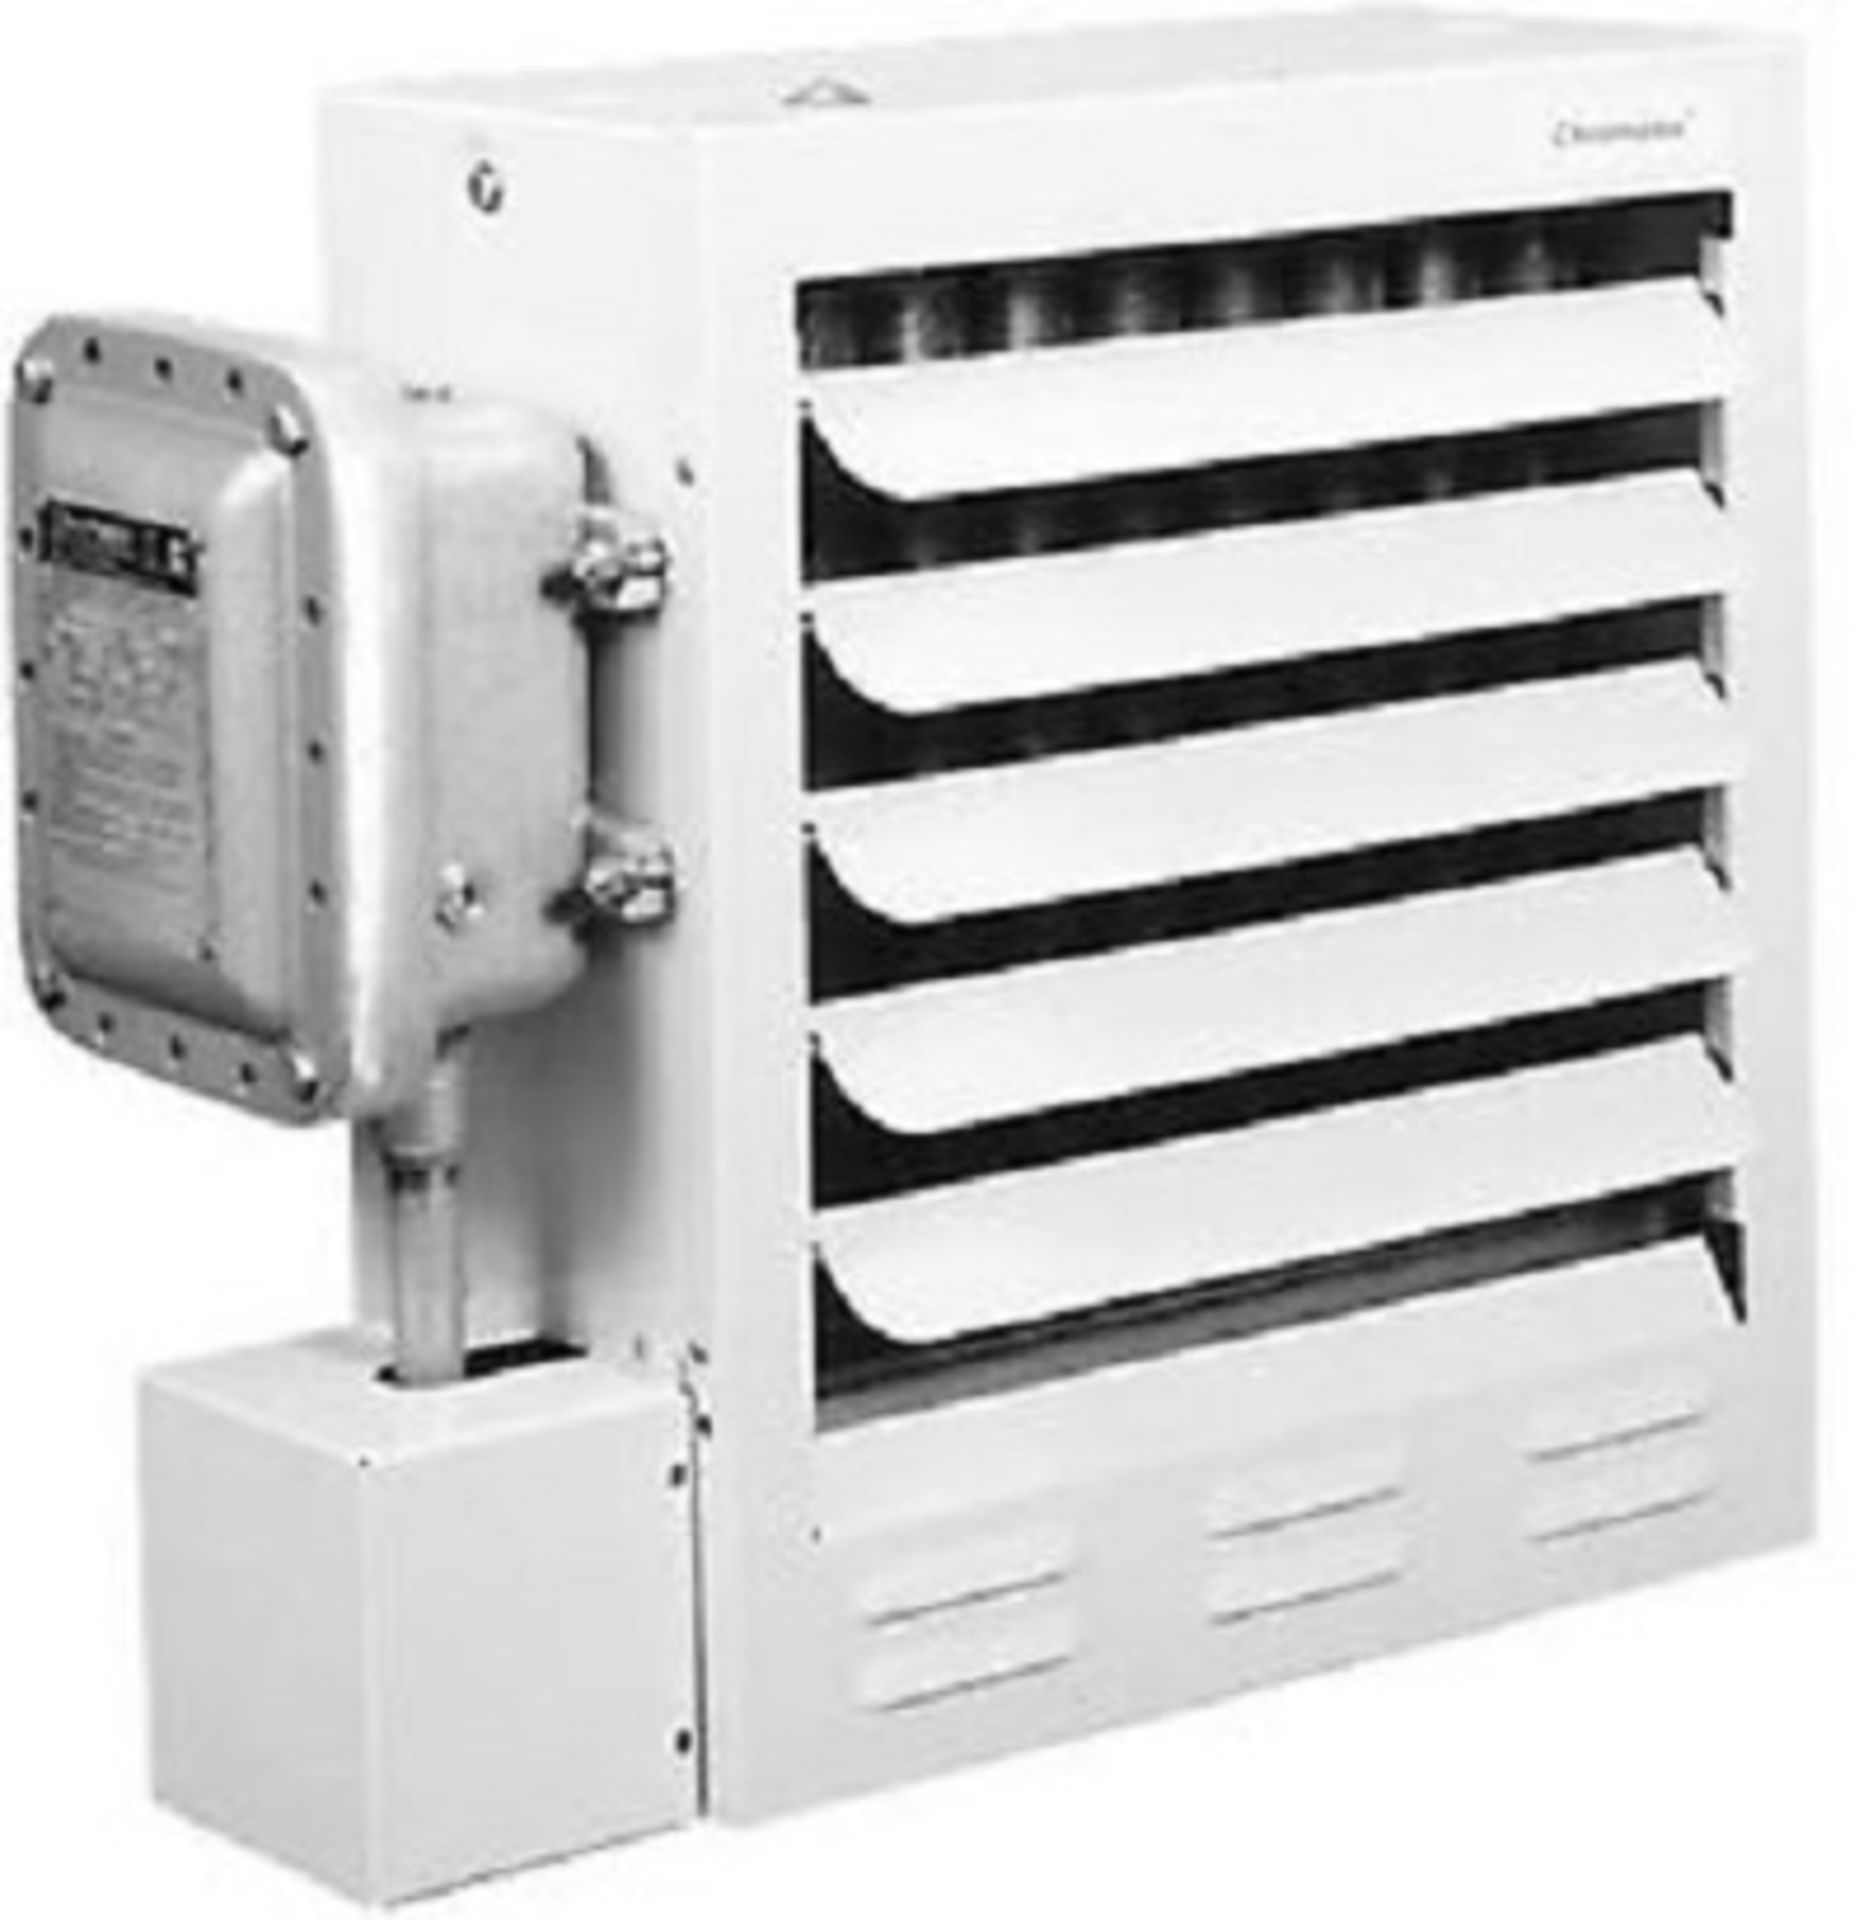 CHROMALOX Forced Air Heater, Explosion Proof - Mod: CXH-A-10-63-32-40-10-10-EP (full details below) - Image 2 of 4